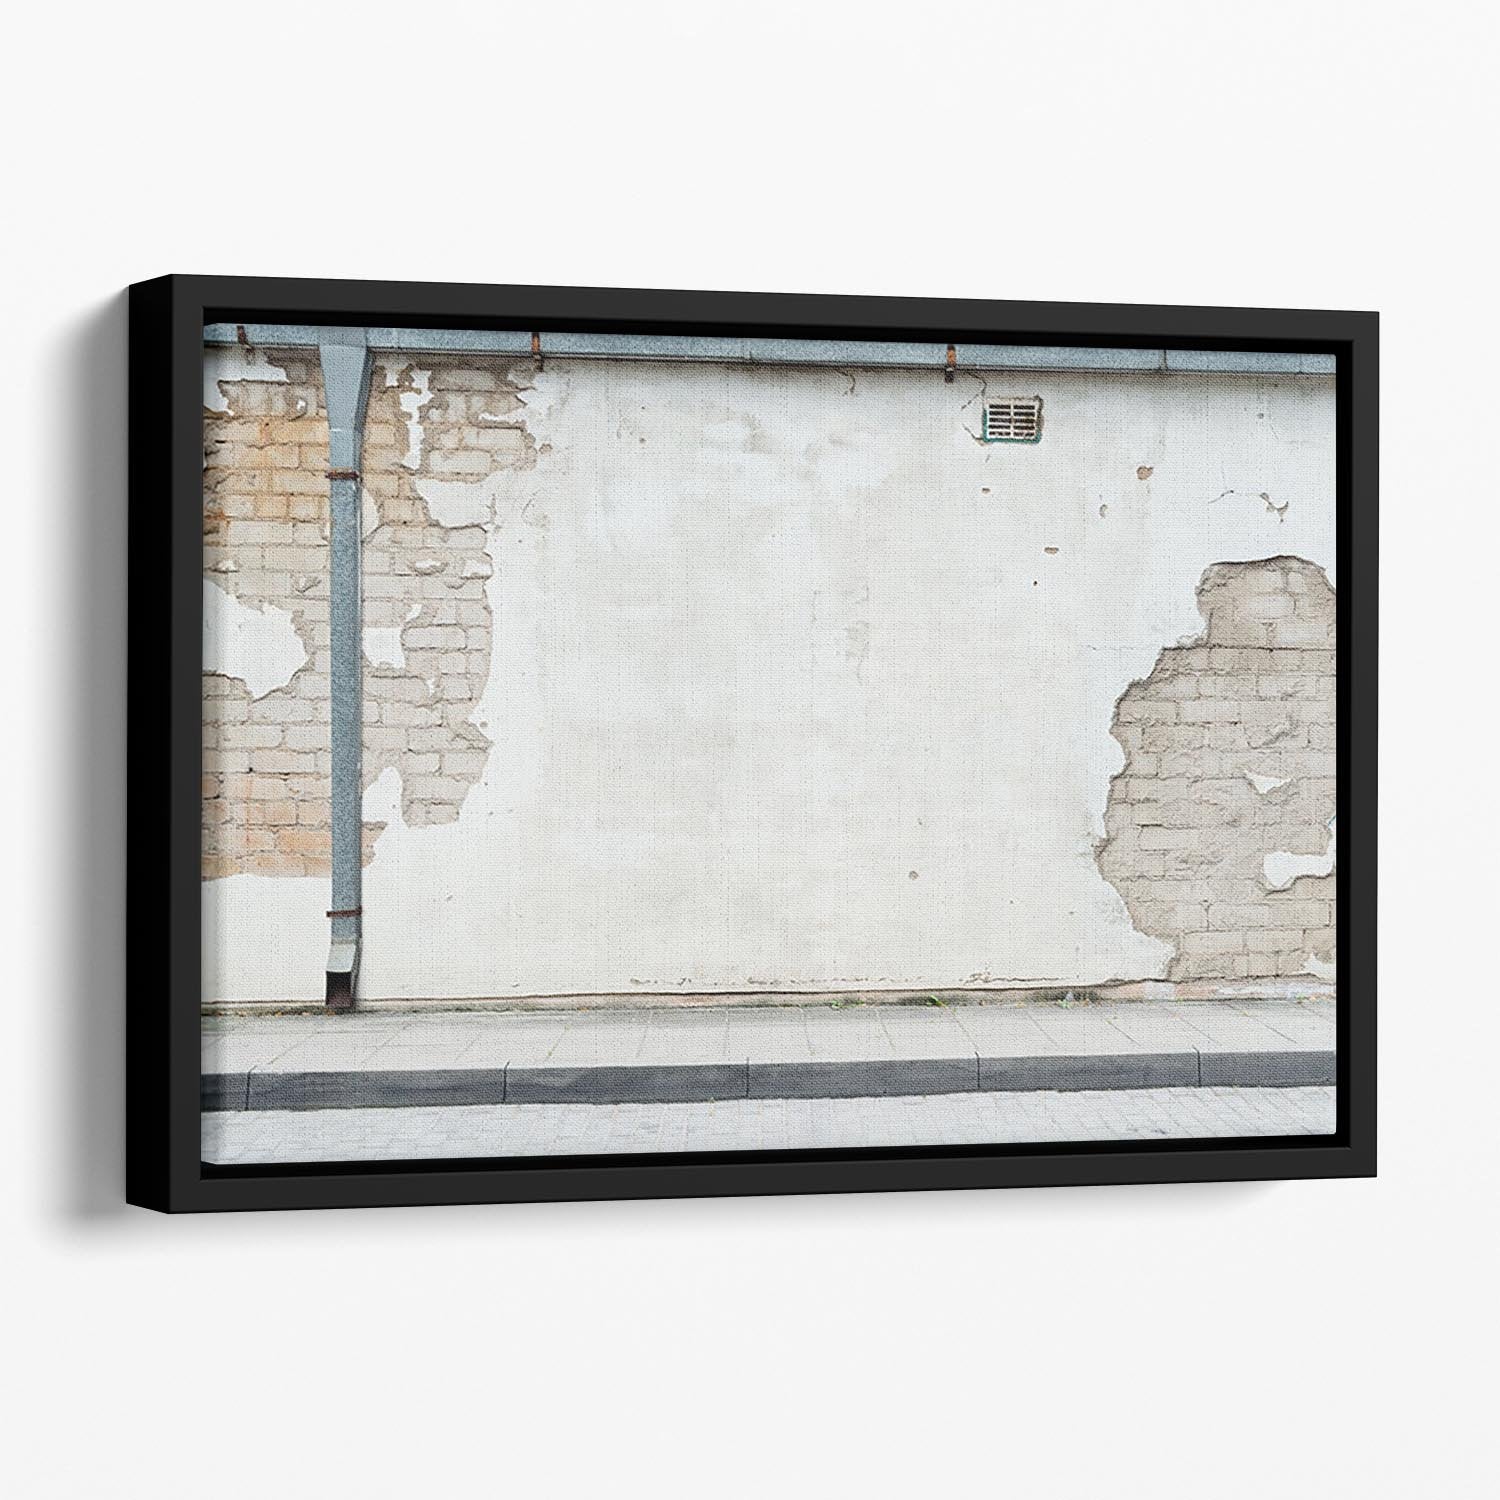 Aged street wall background Floating Framed Canvas - Canvas Art Rocks - 1